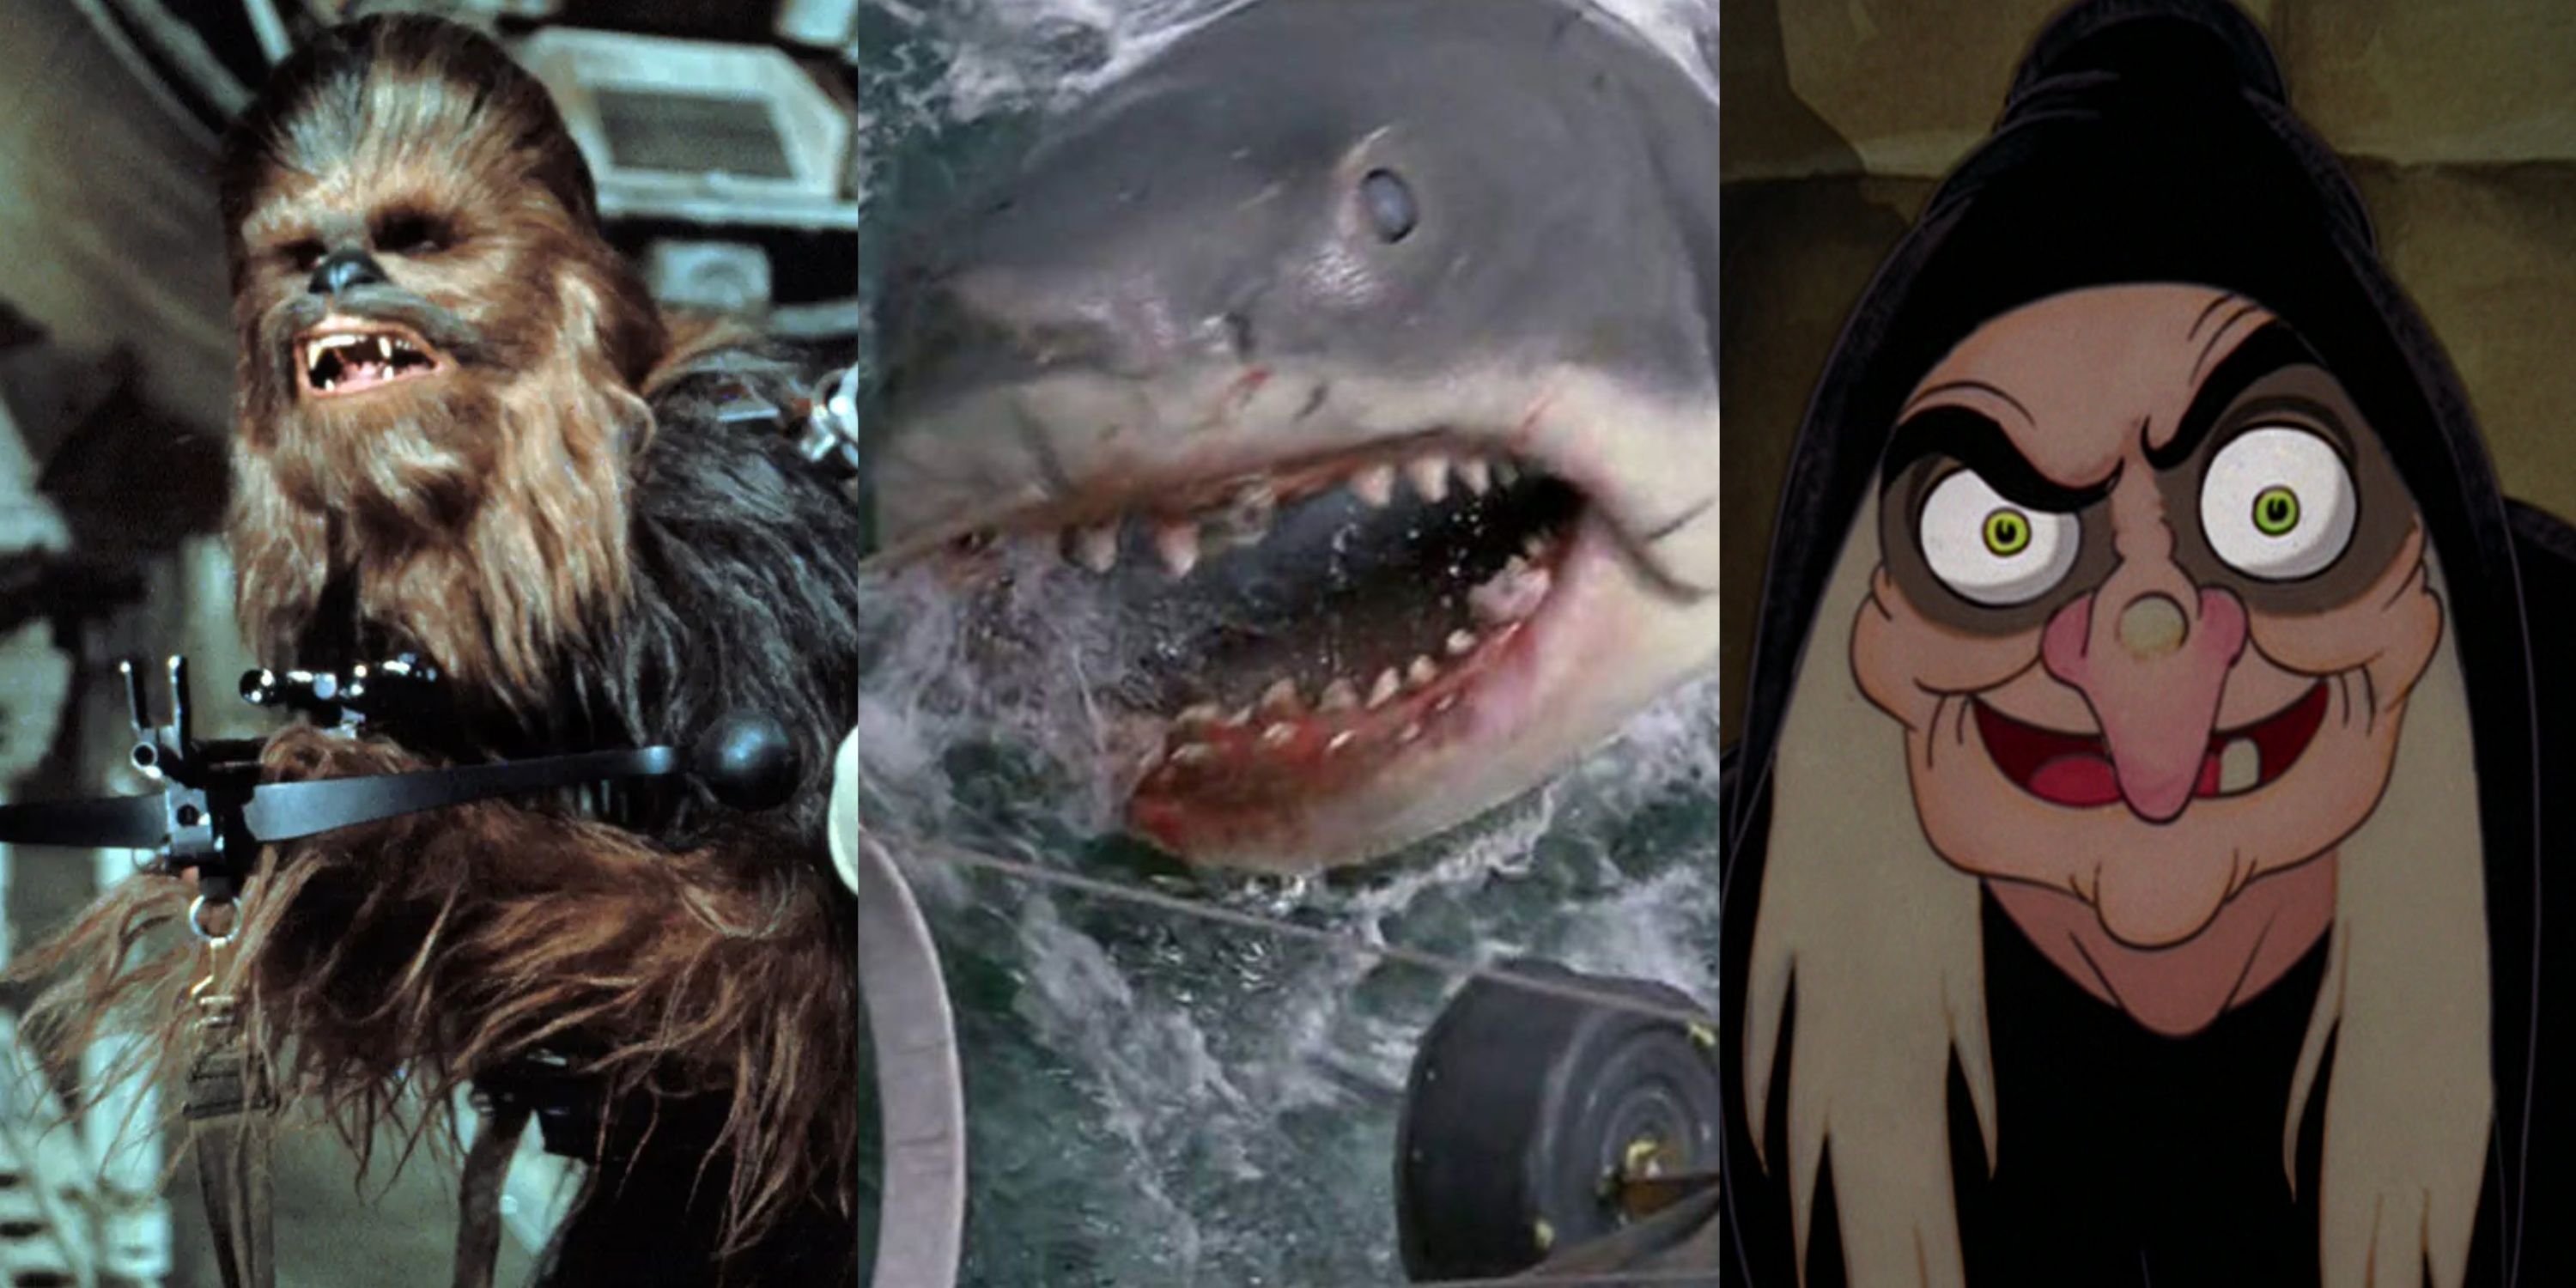 Split image of Star Wars' Chewbacca, Jaws' shark, and Snow White and the Seven Dwarfs' Queen